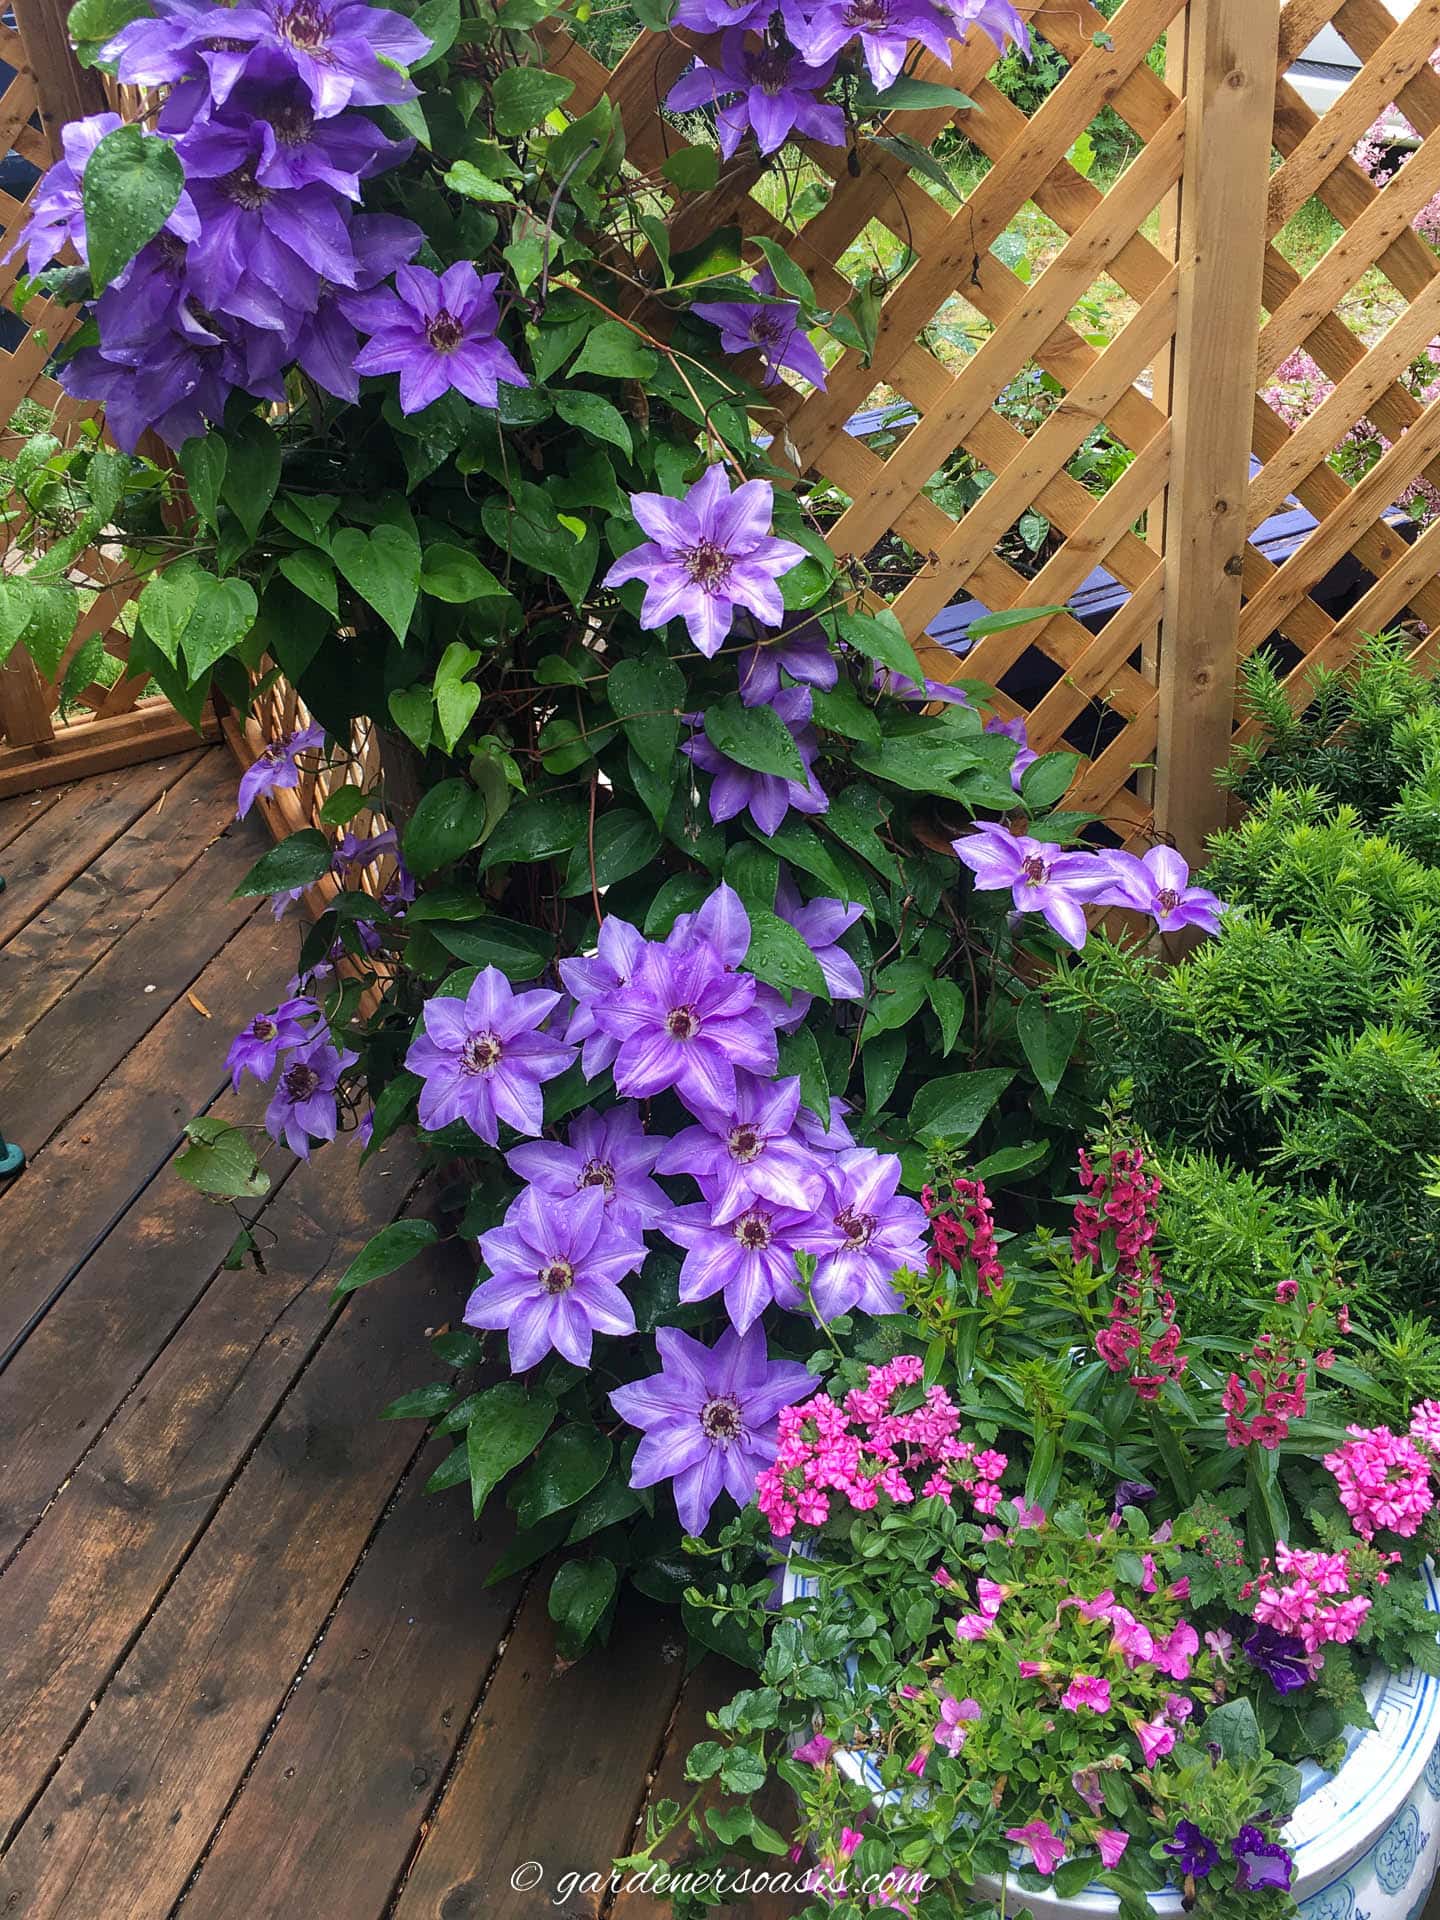 clematis growing up a lattice fence beside the deck